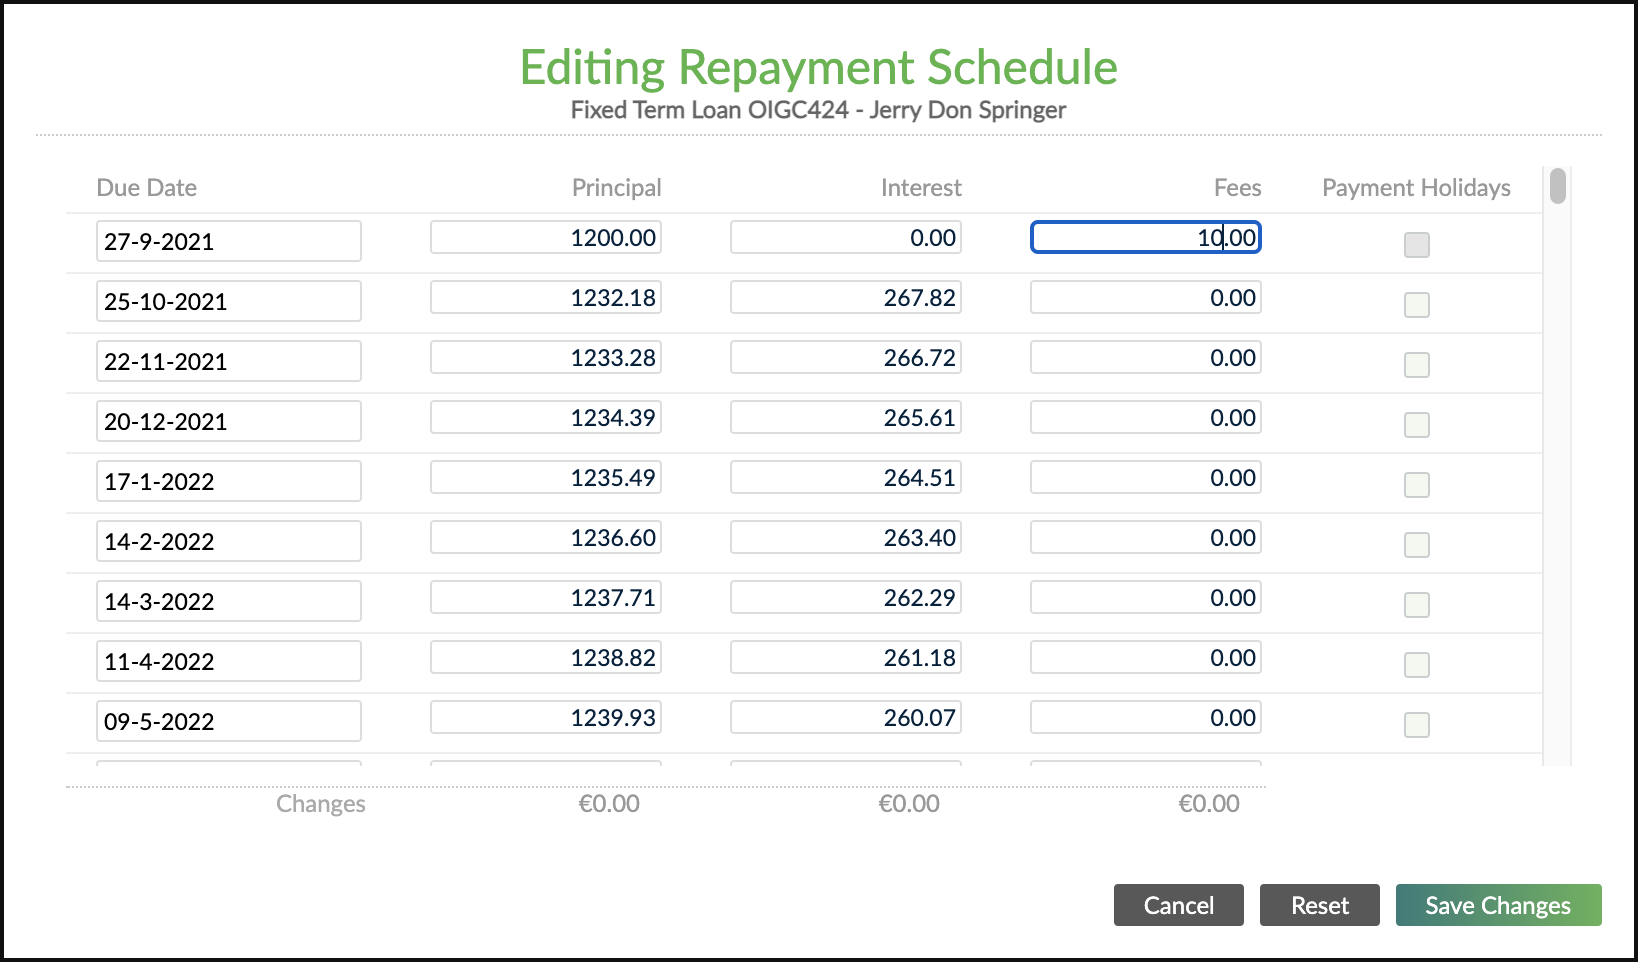 Editing repayment schedule dialogue showing where you can adjust fees